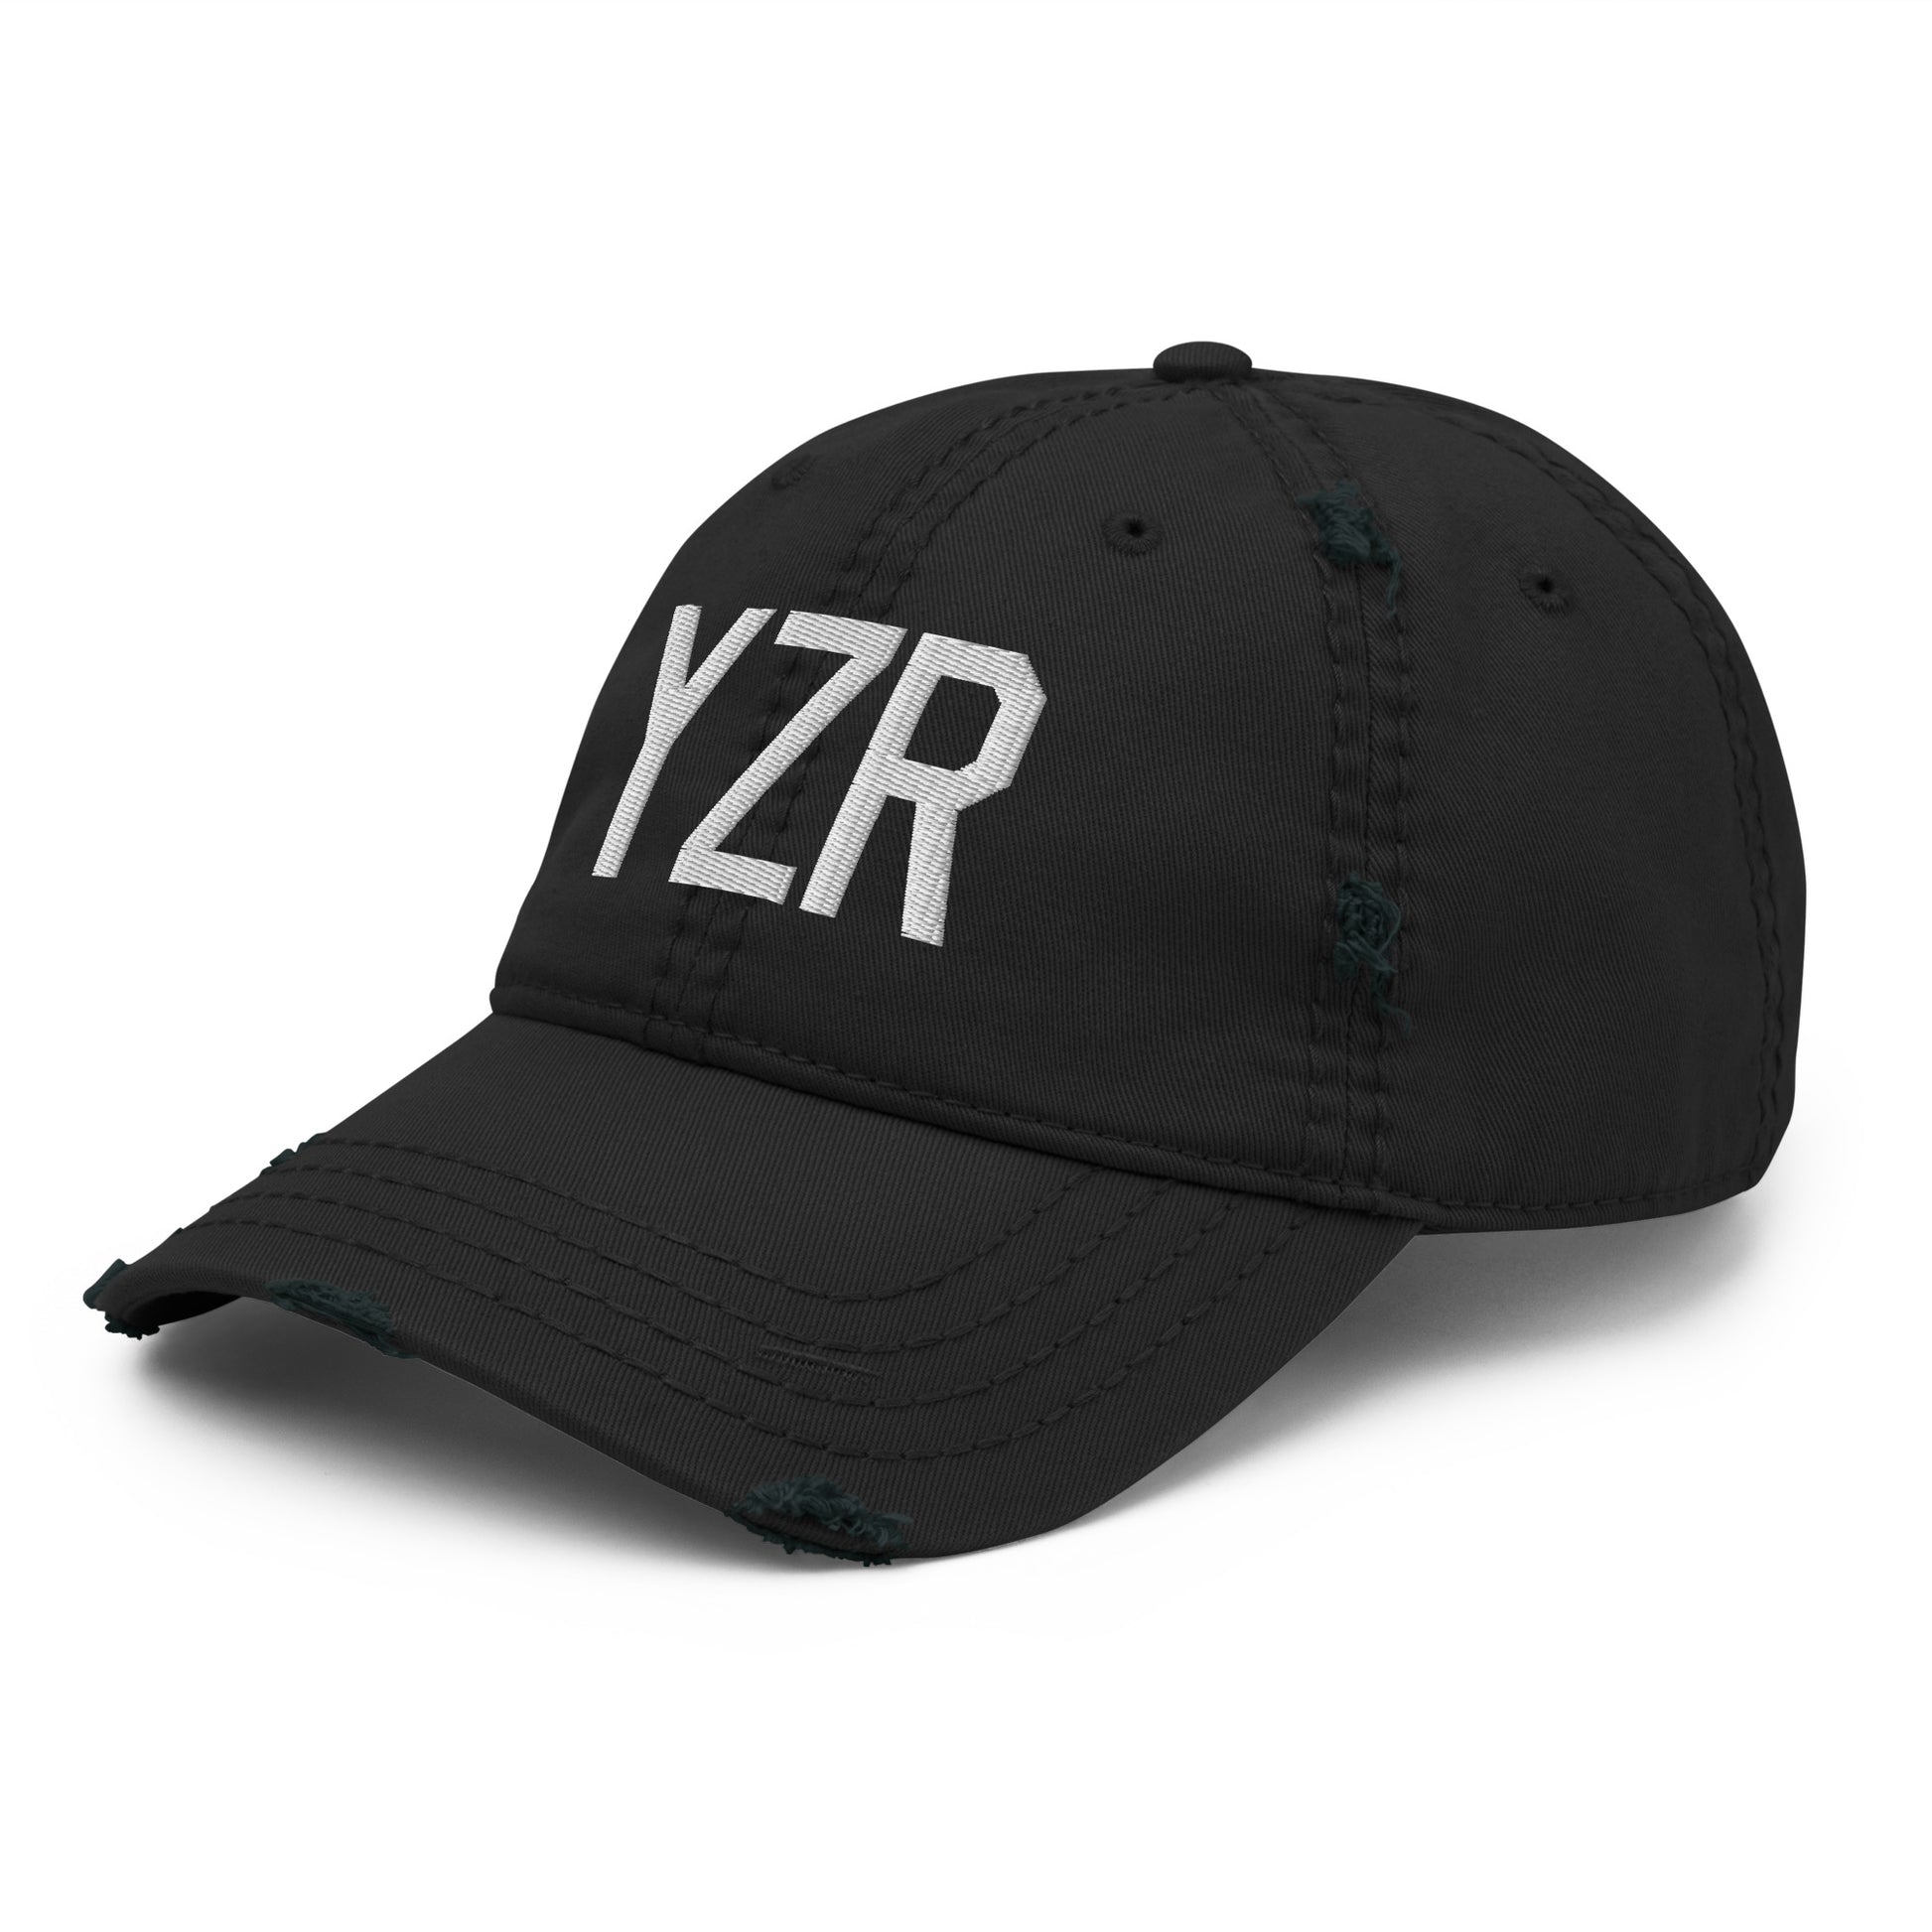 Airport Code Distressed Hat - White • YZR Sarnia • YHM Designs - Image 11